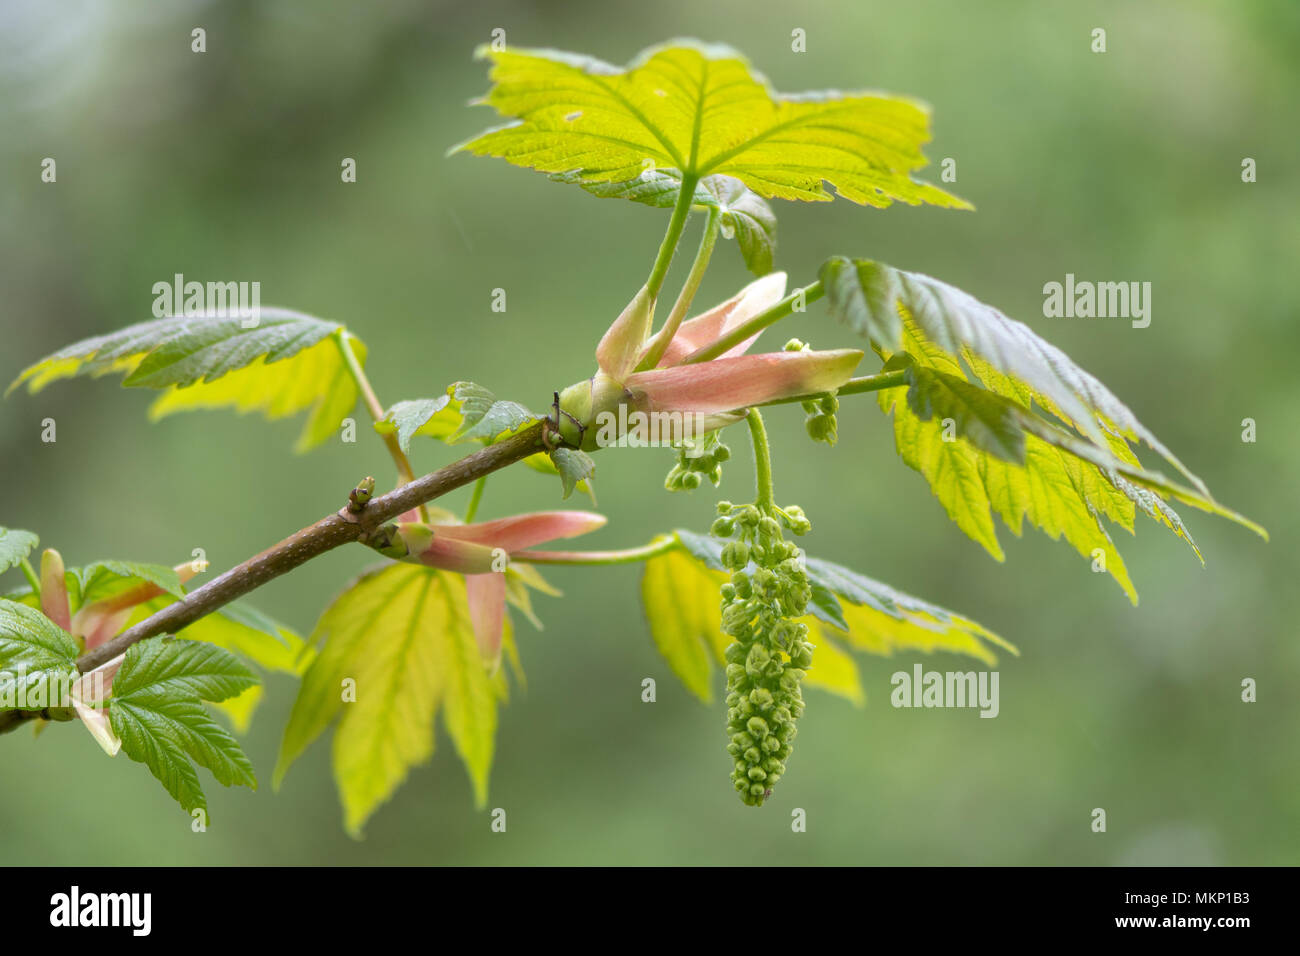 Sycamore (Acer pseudoplatanus) tree in flower. Panicles of monoecious flowers on plant in the family Sapindaceae Stock Photo